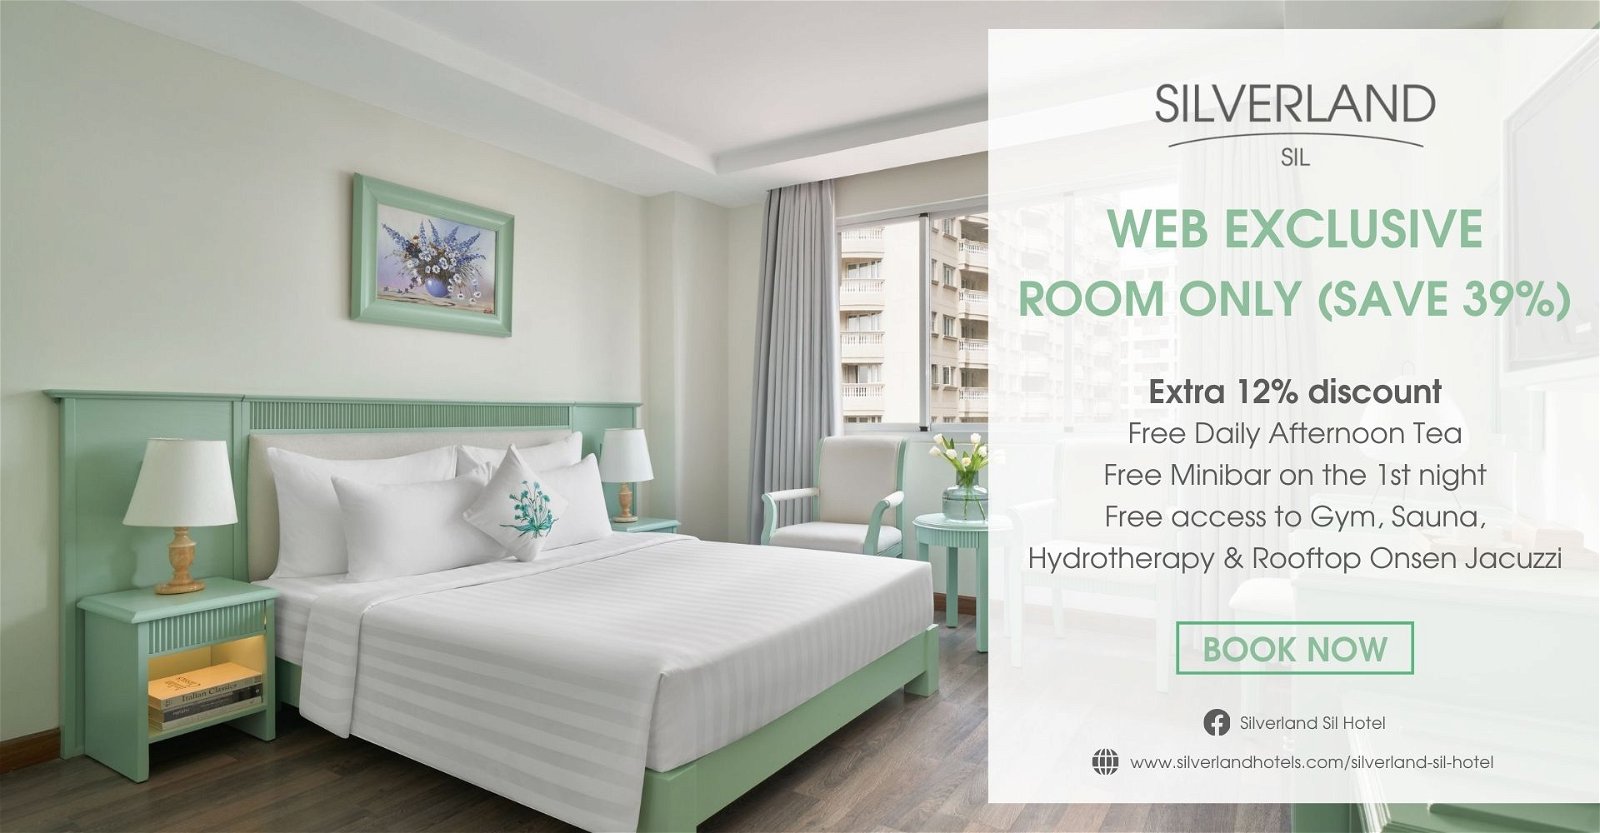 SILVERLAND SIL – WEB EXCLUSIVE – ROOM ONLY (SAVE 39%)